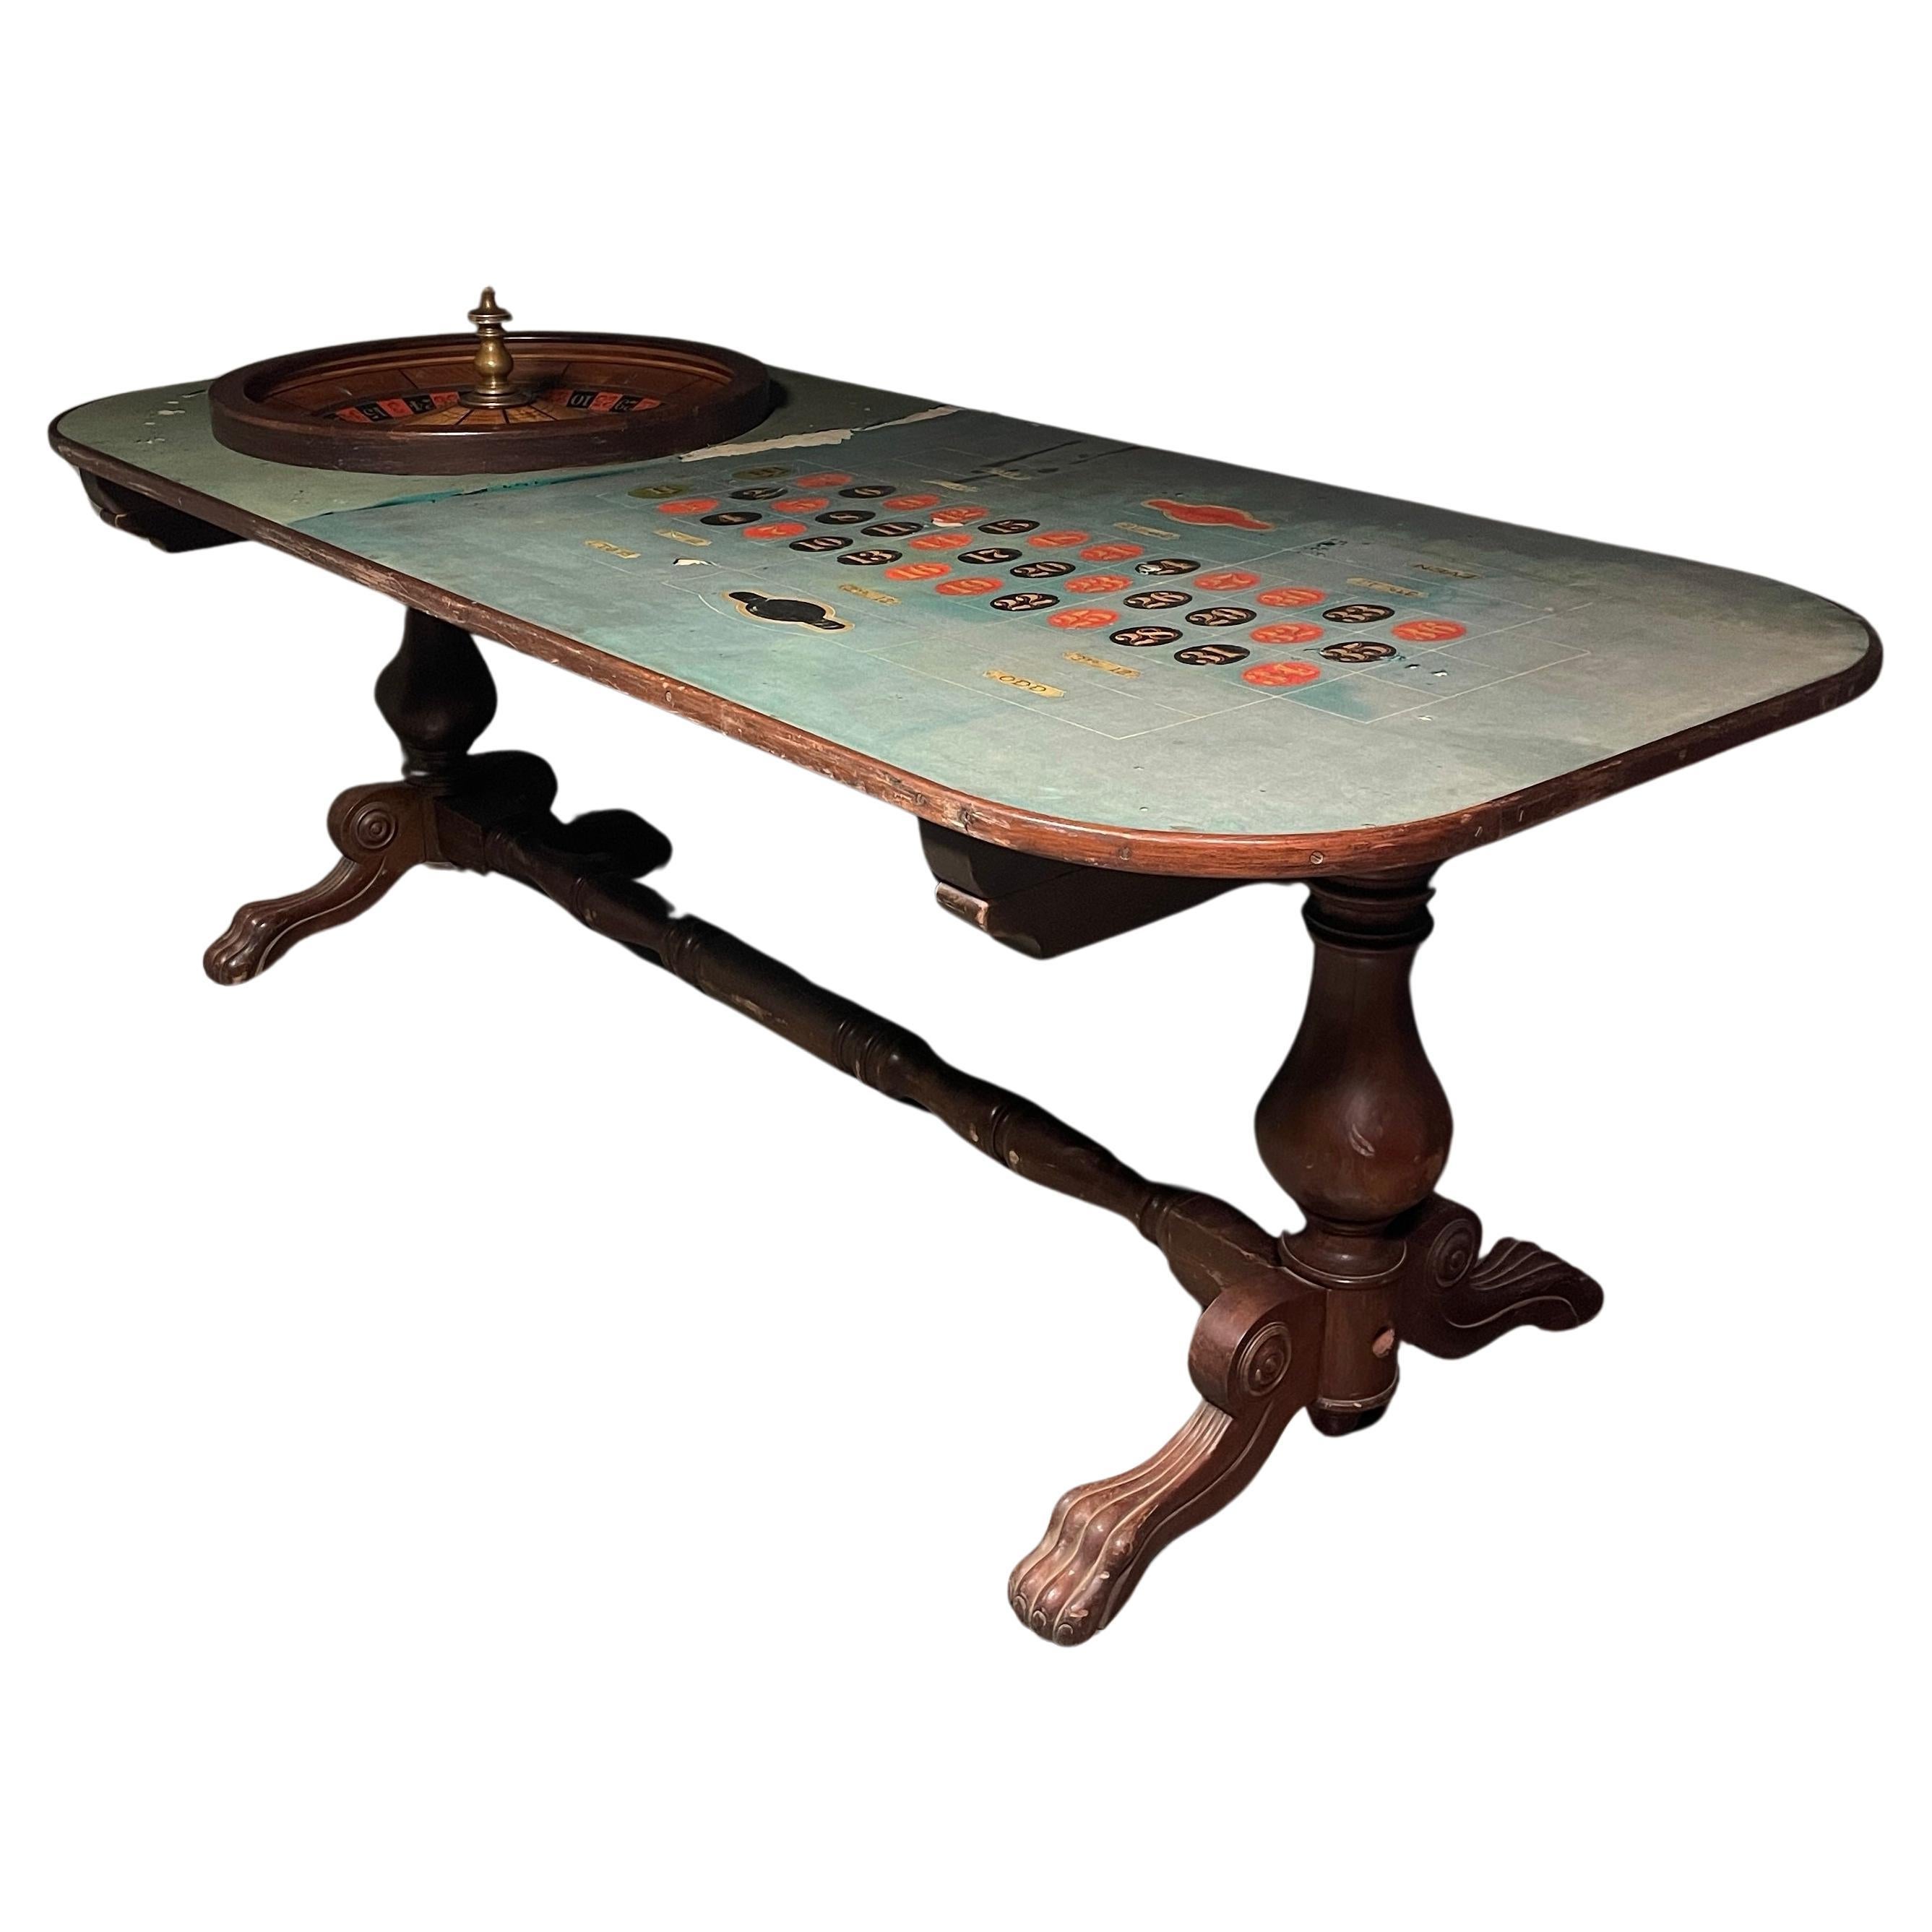 19th century ROULETTE WHEEL TABLE By the William Ellis Co.